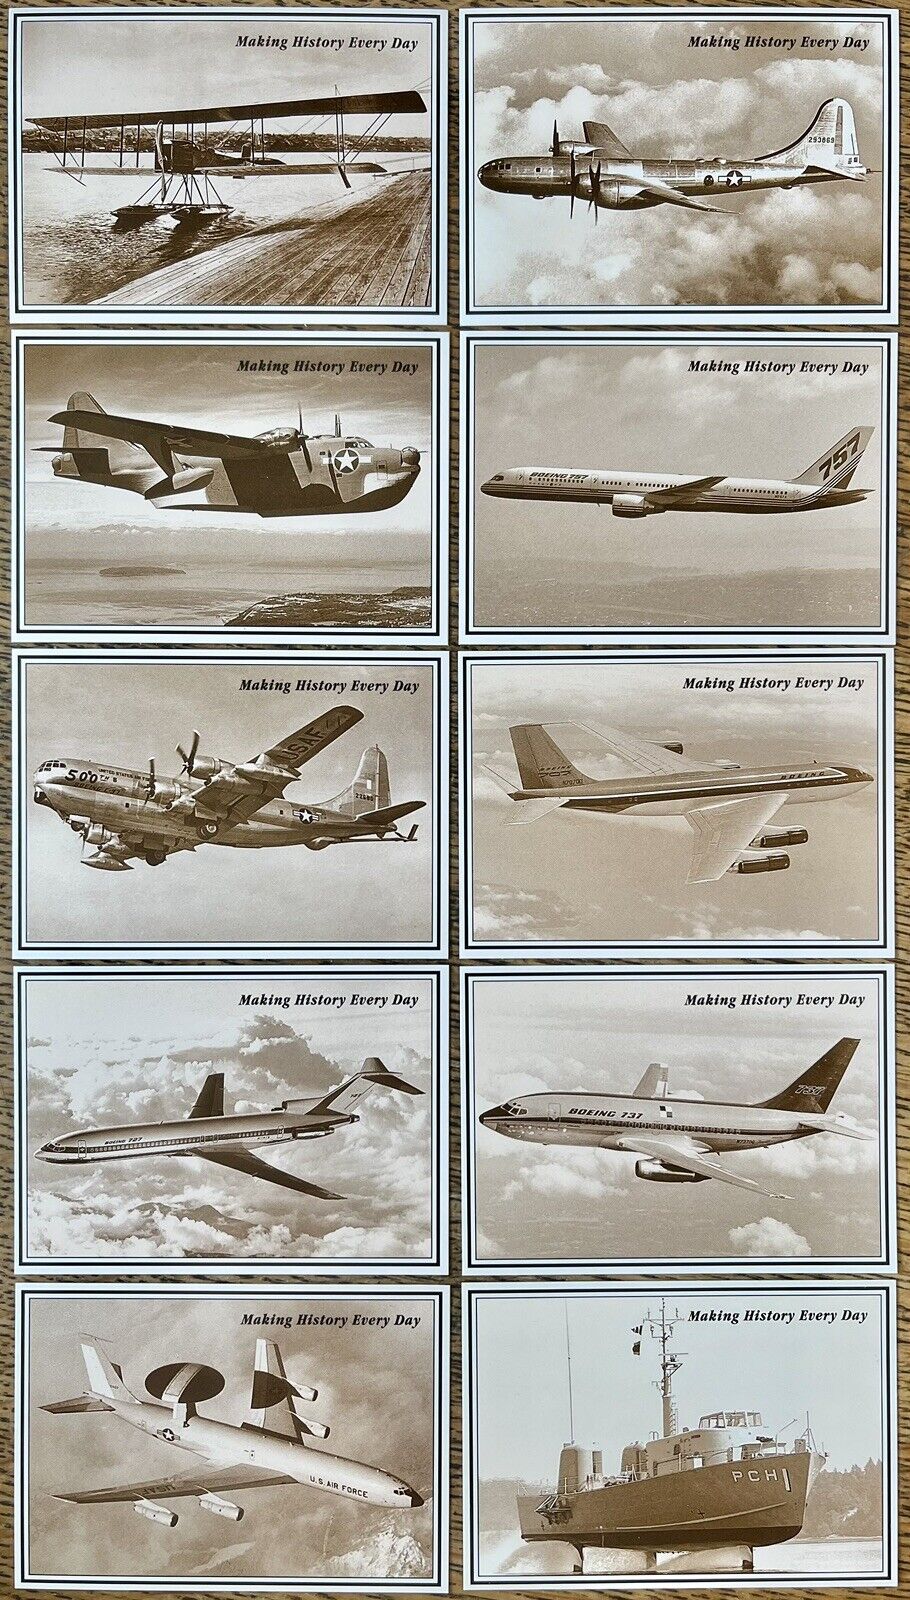 Boeing 75th Anniversary trading cards set (10) - Making History Every Day 1991